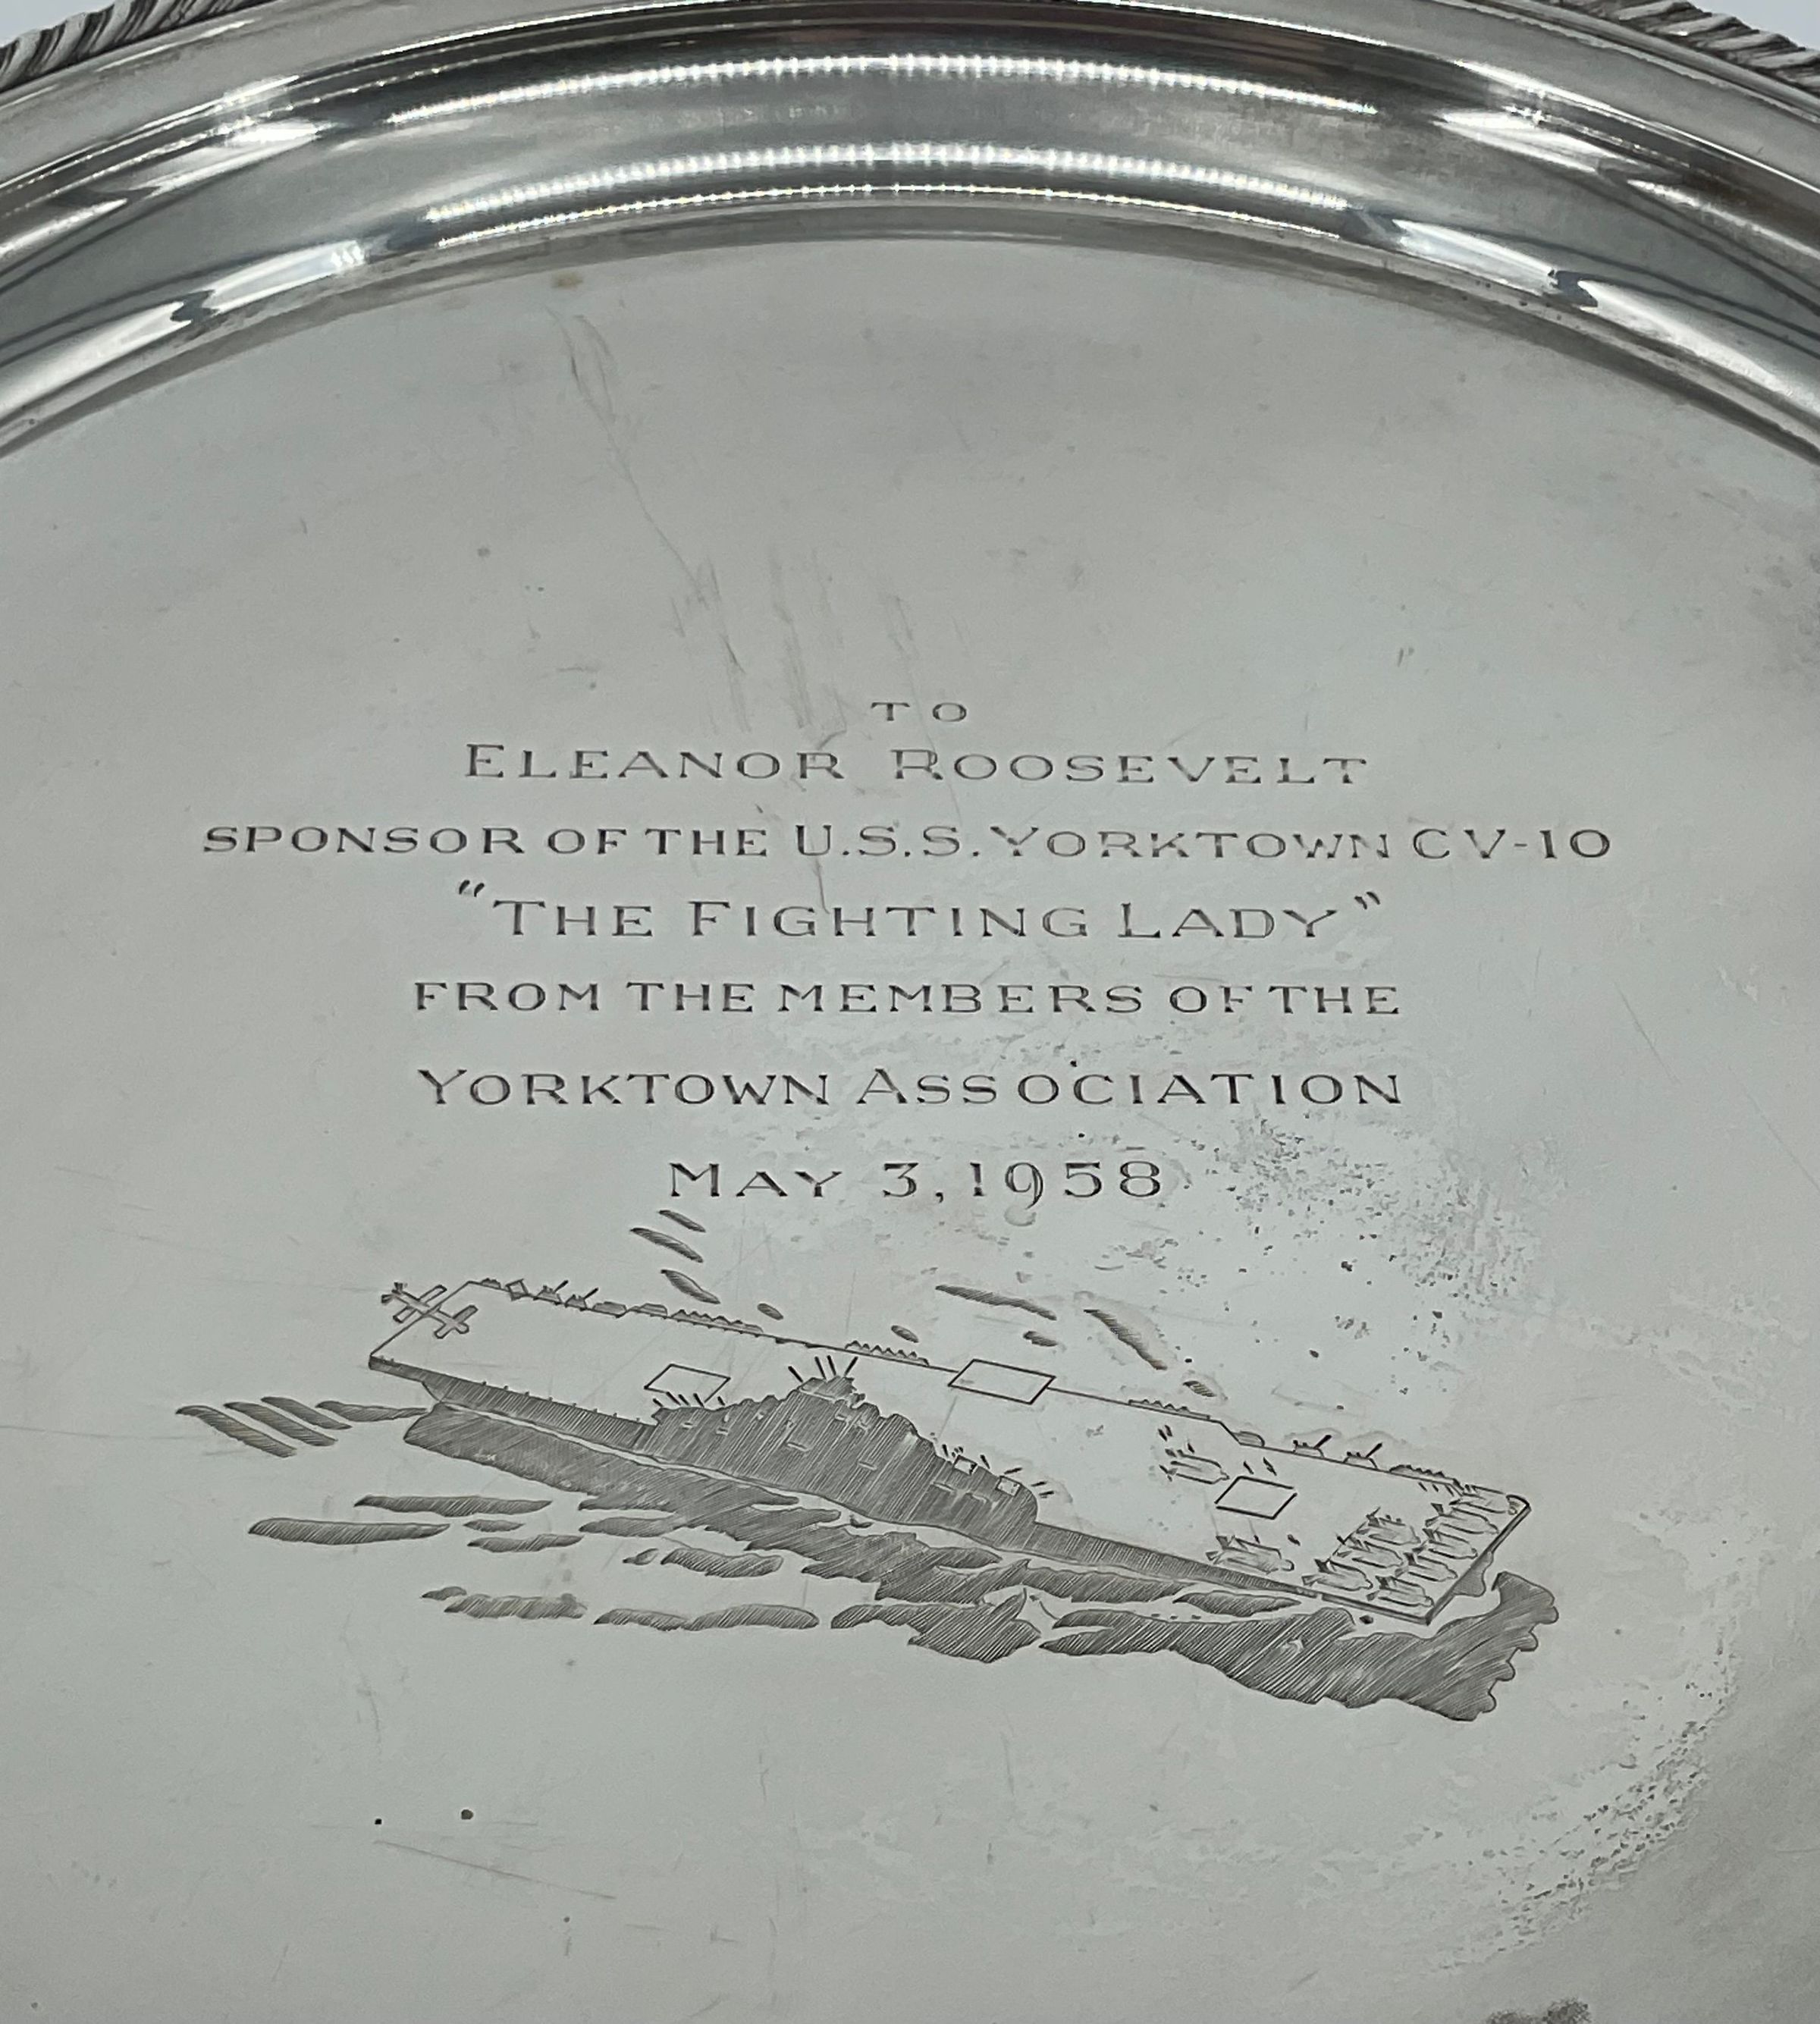 Primary Image of Commemorative Serving Tray of Eleanor Roosevelt